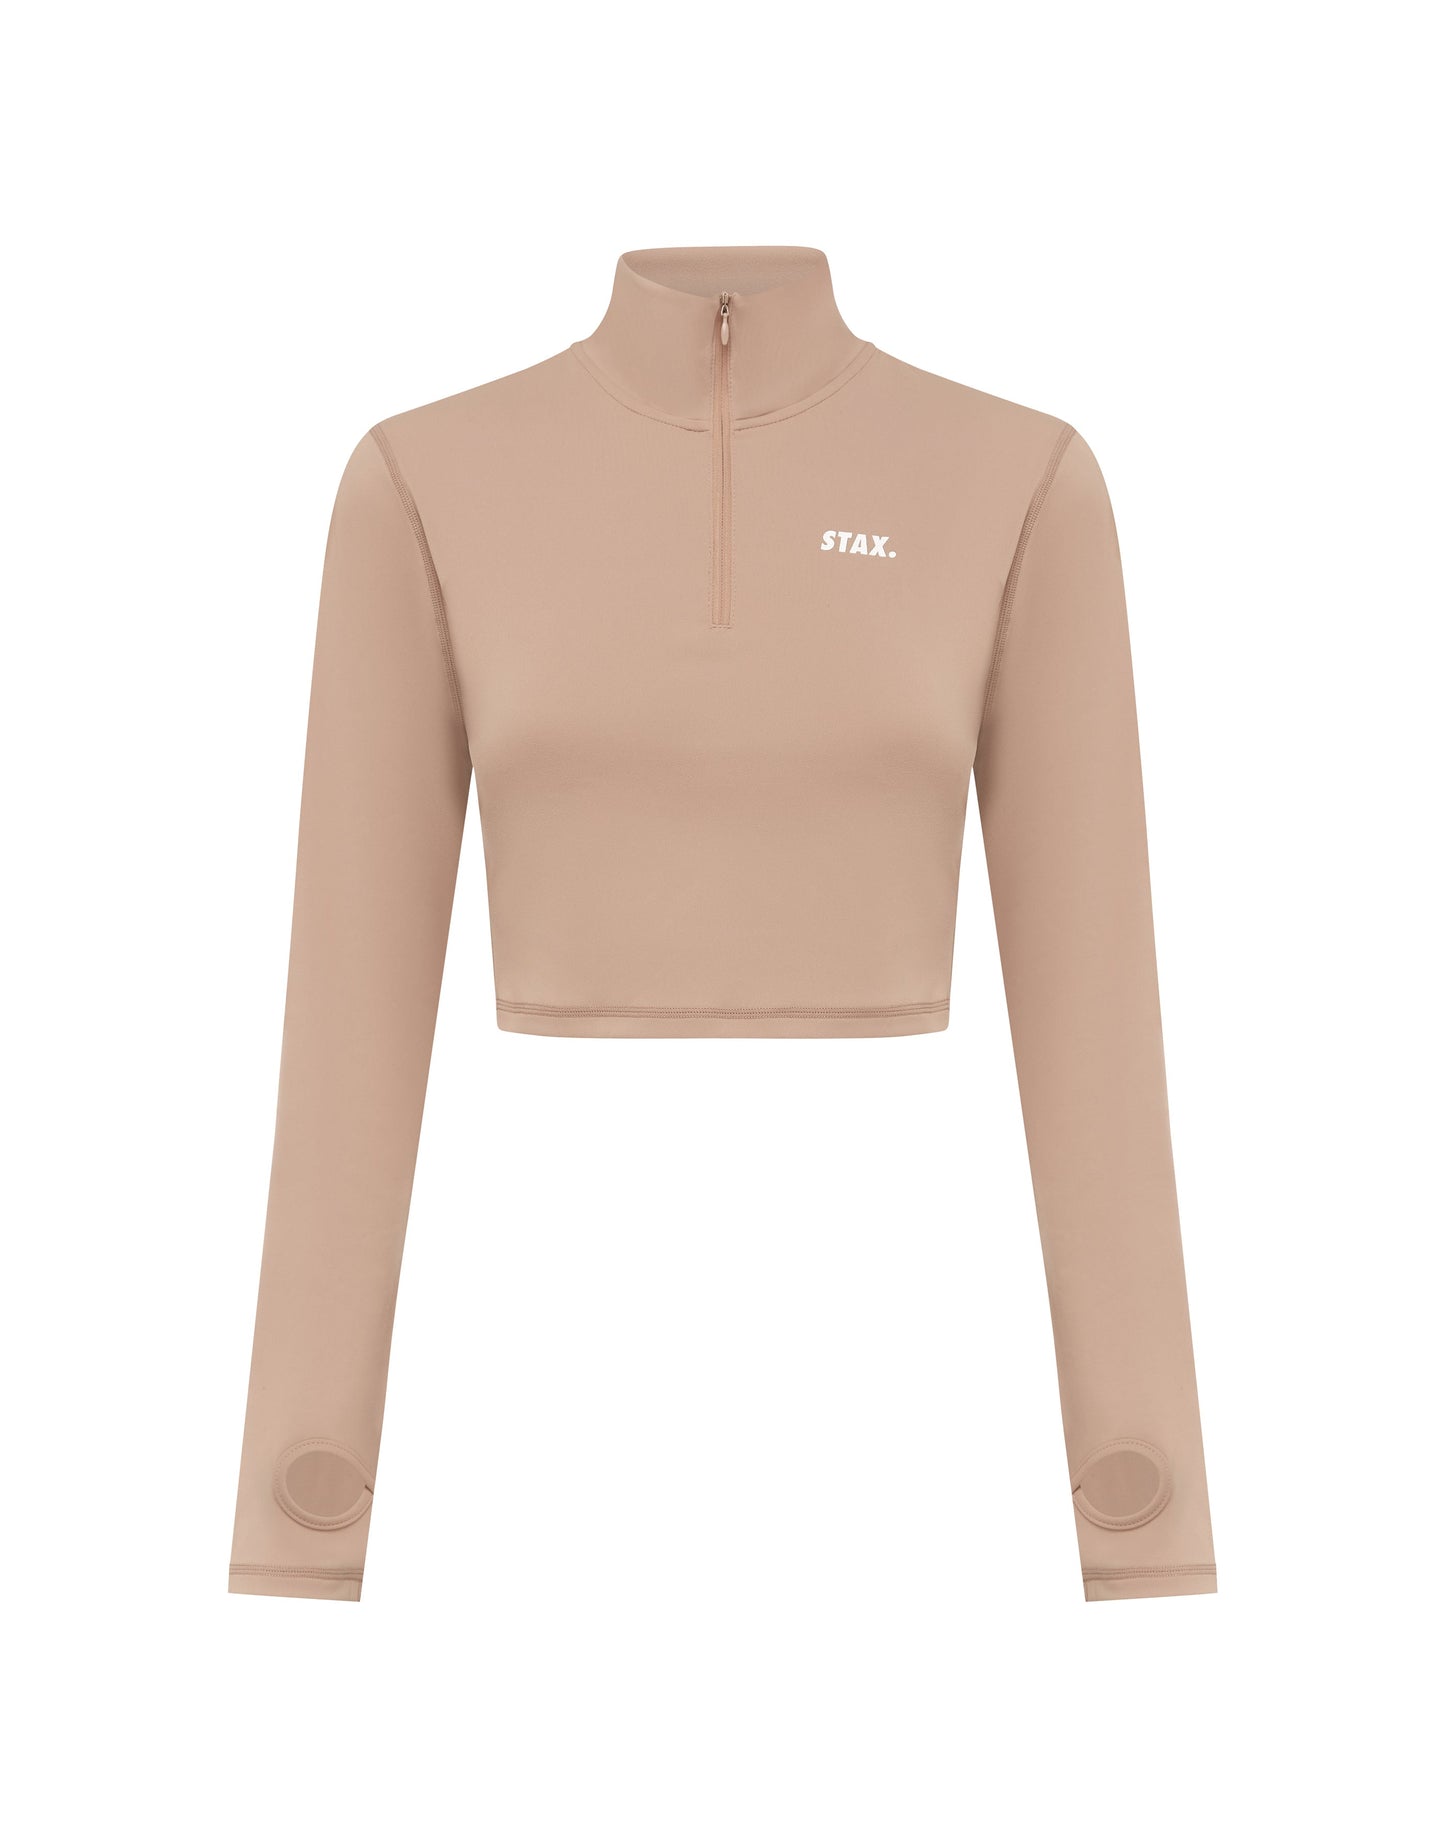 Long Sleeve Body Top NANDEX ™ Warm Clay - Taupe